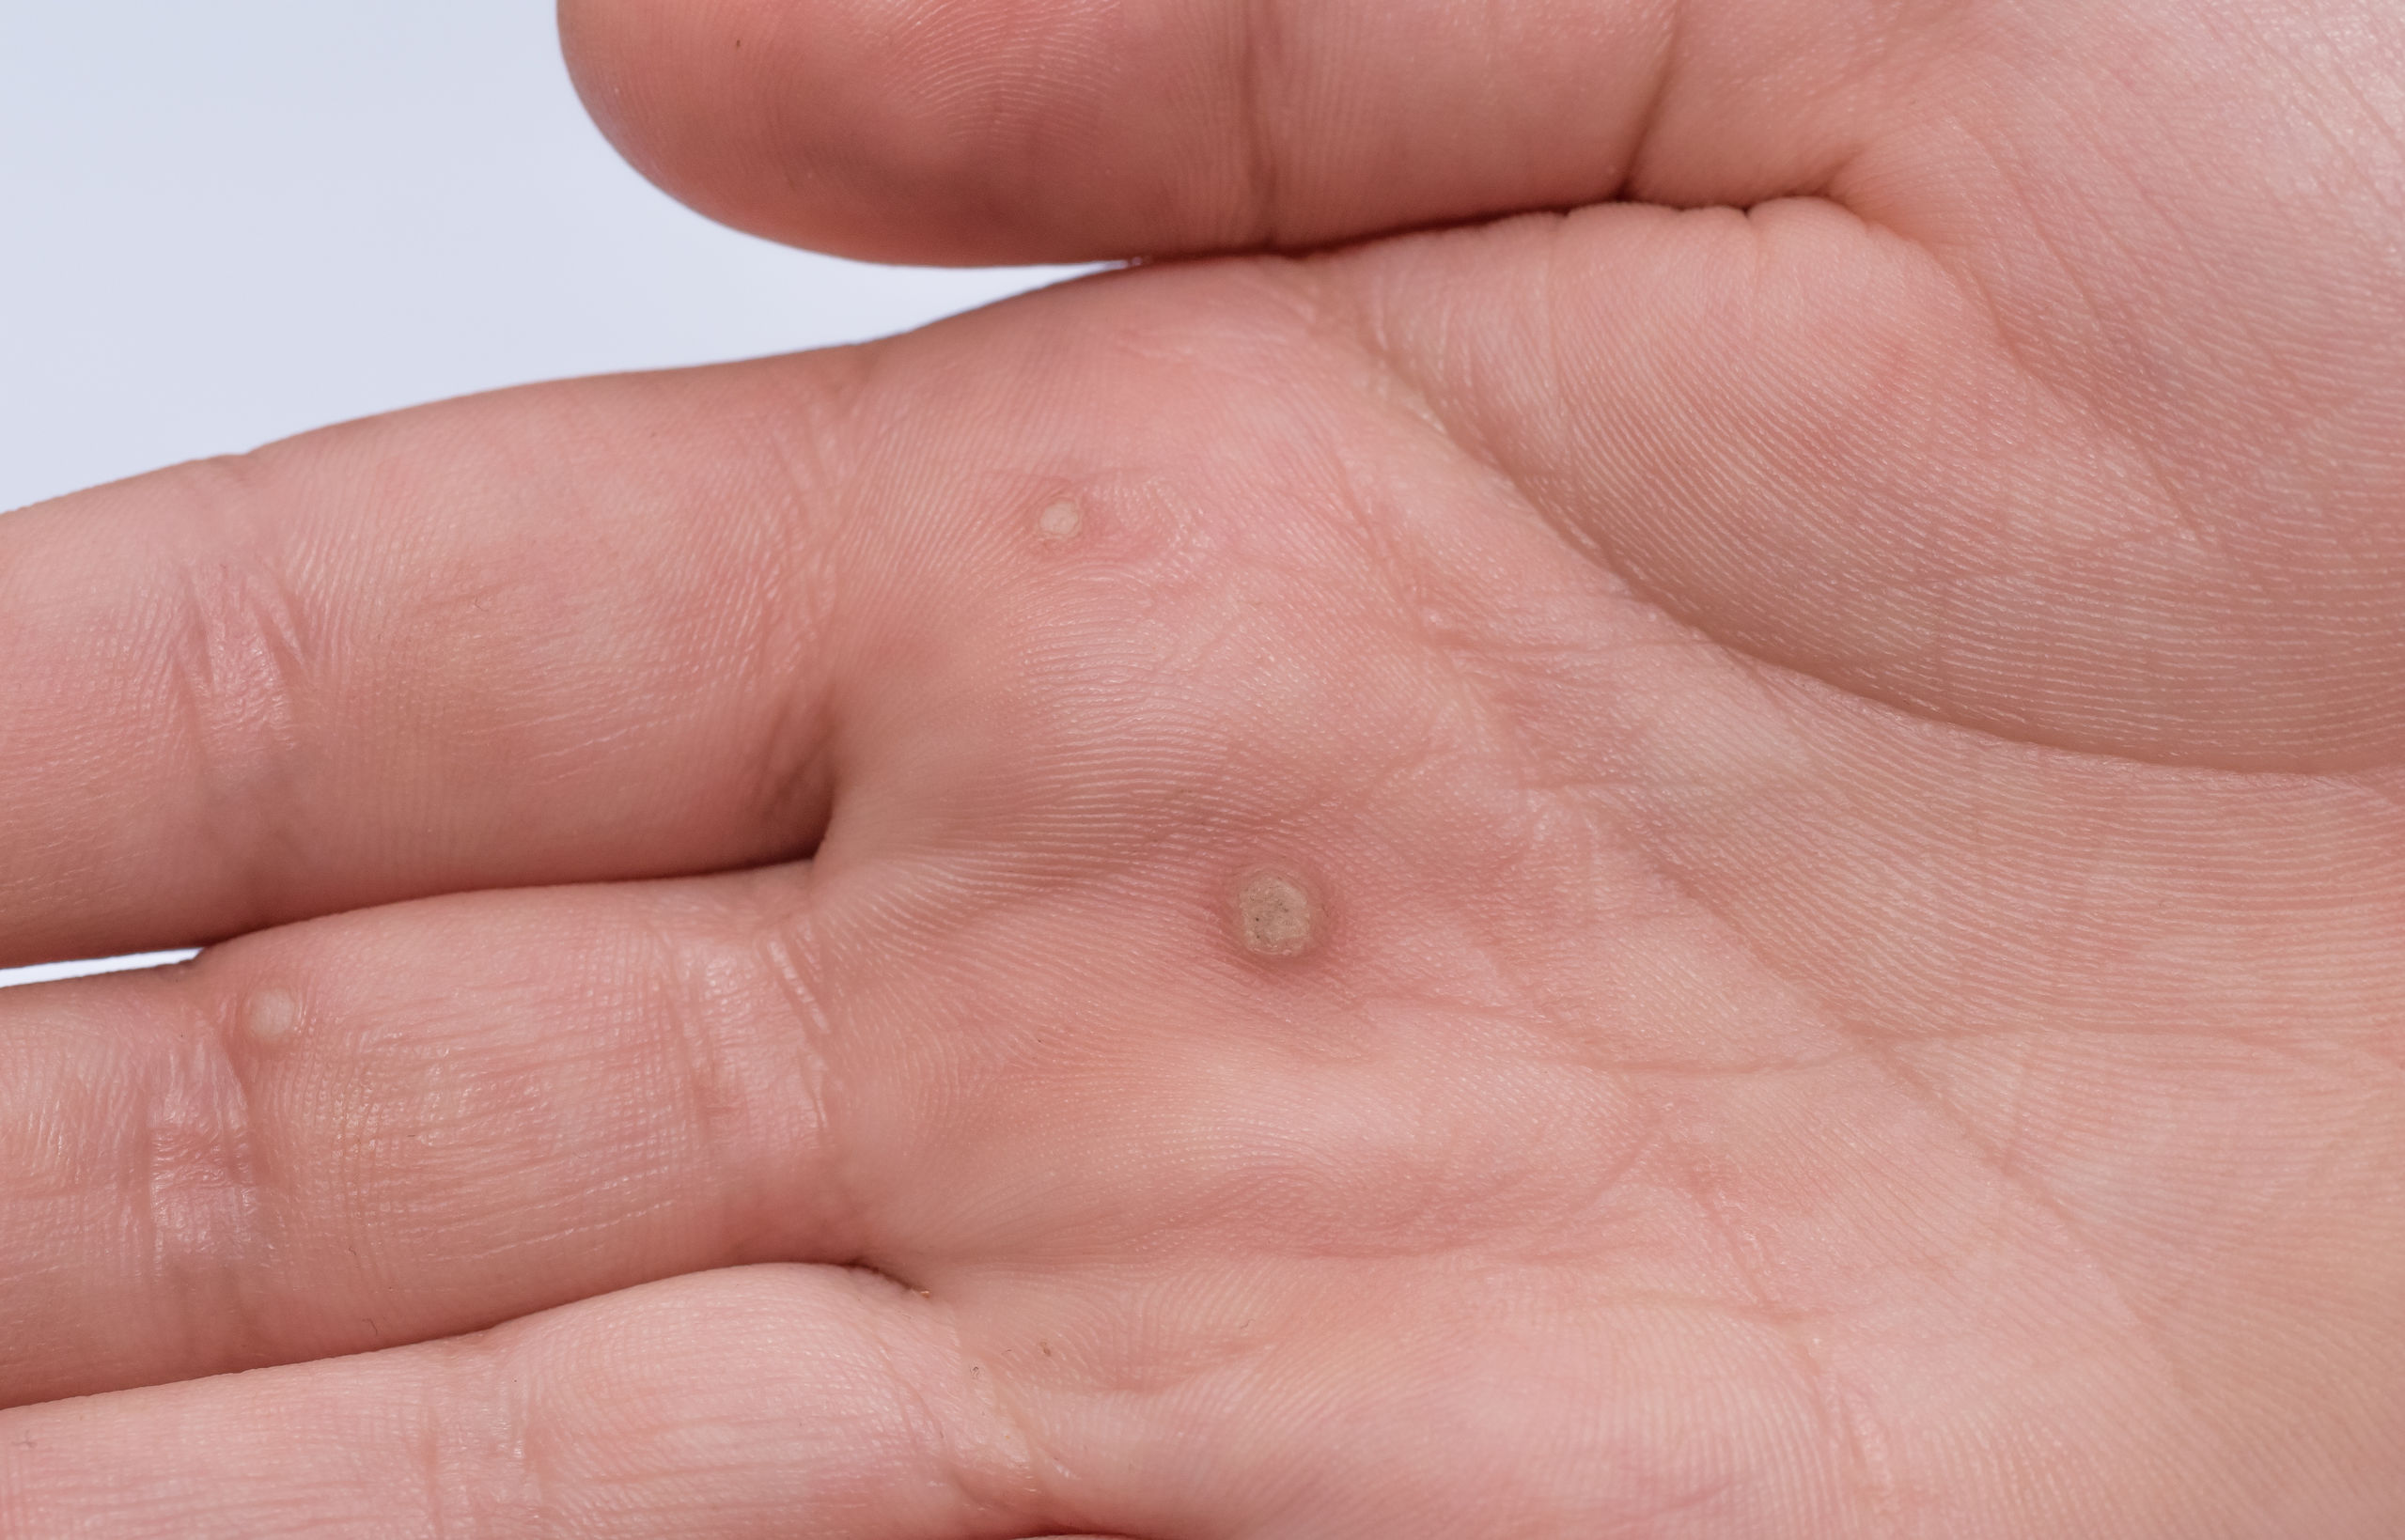 warts on hands and body